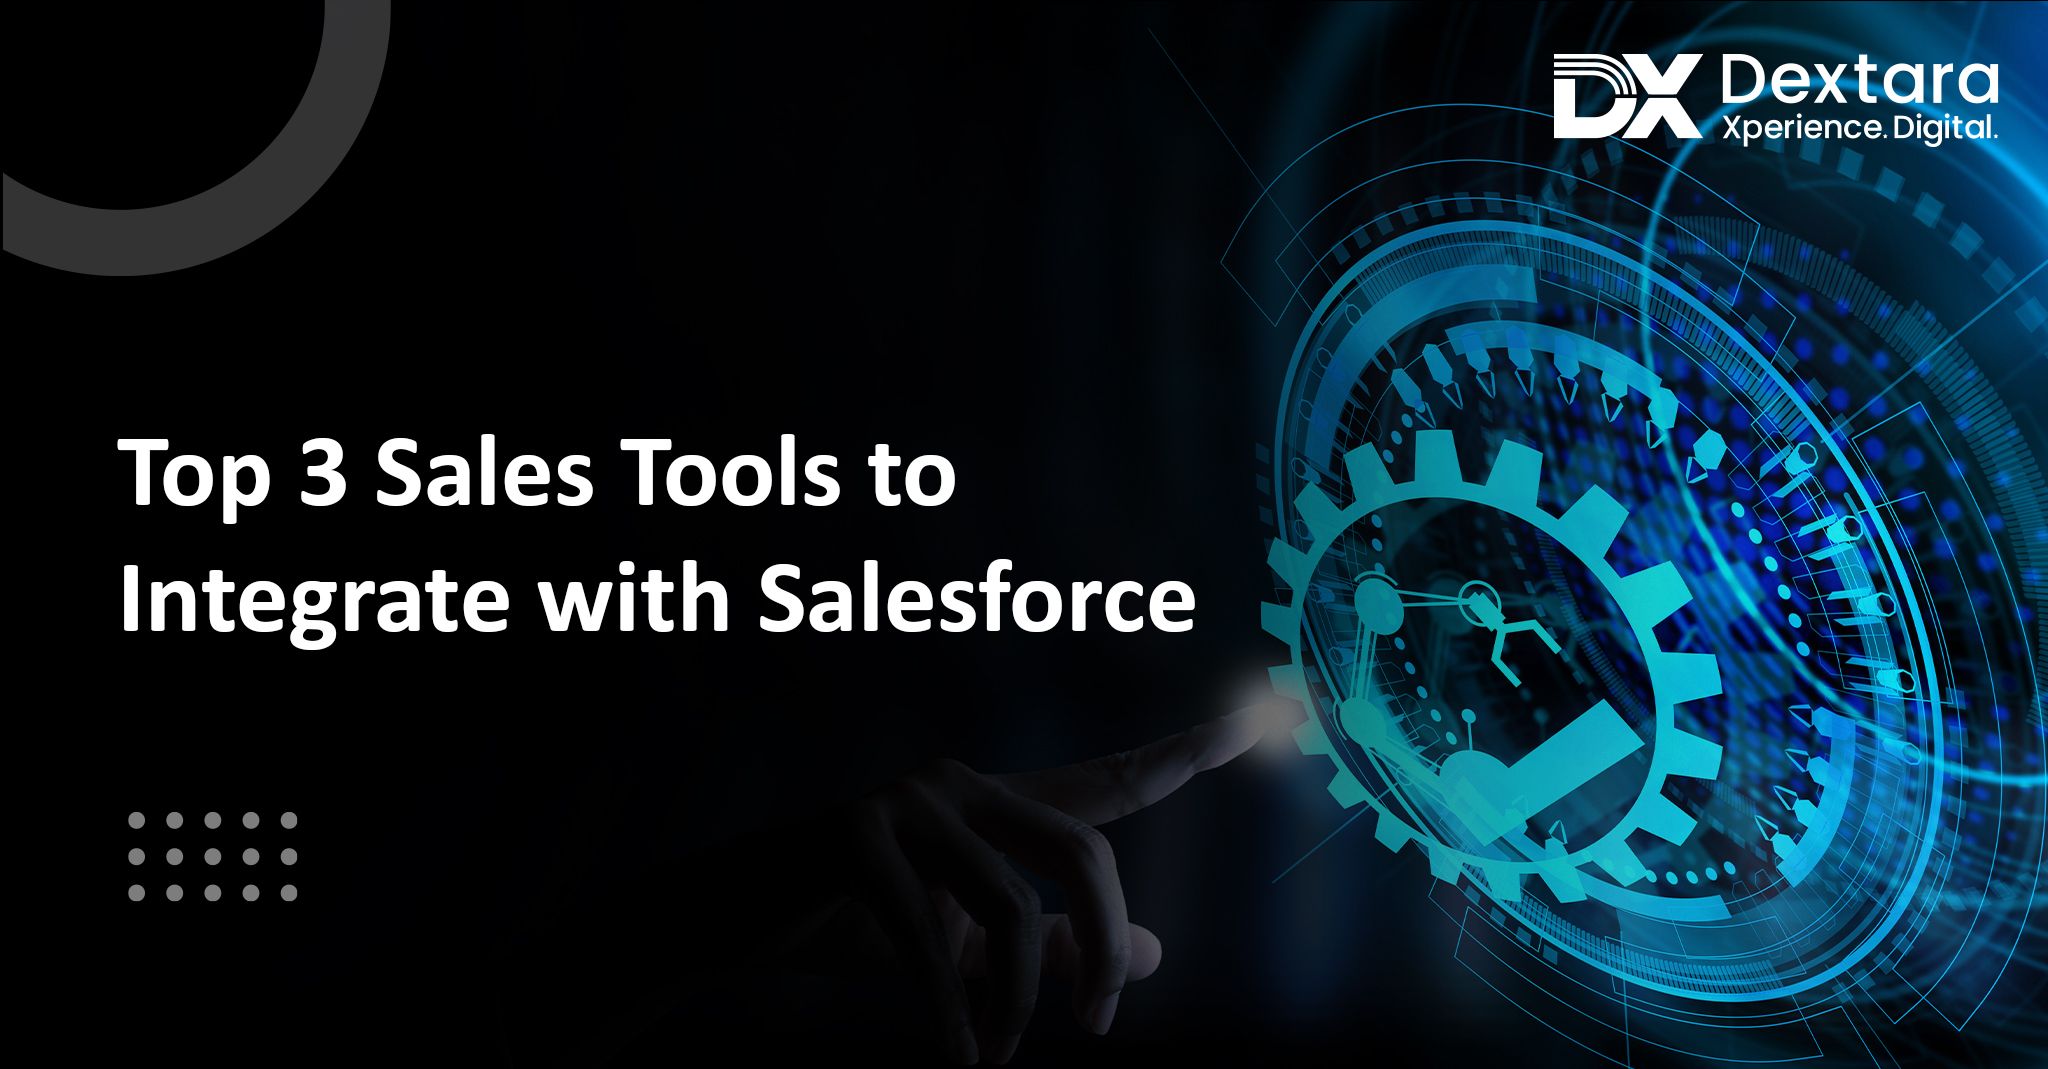 Top 3 Sales Tools to Integrate with Salesforce